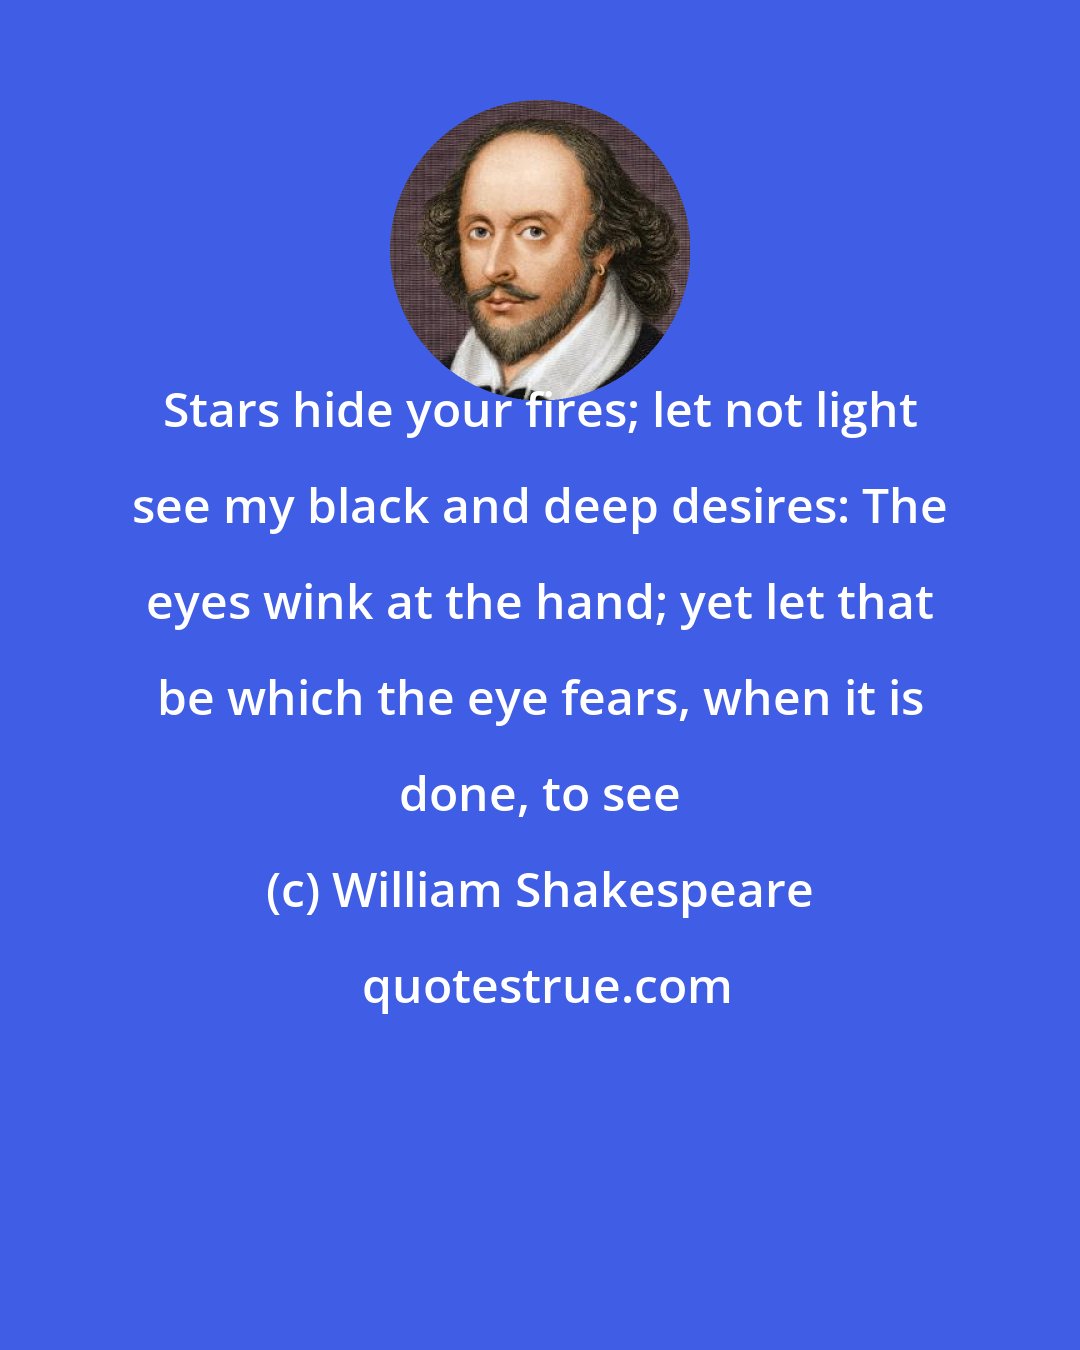 William Shakespeare: Stars hide your fires; let not light see my black and deep desires: The eyes wink at the hand; yet let that be which the eye fears, when it is done, to see